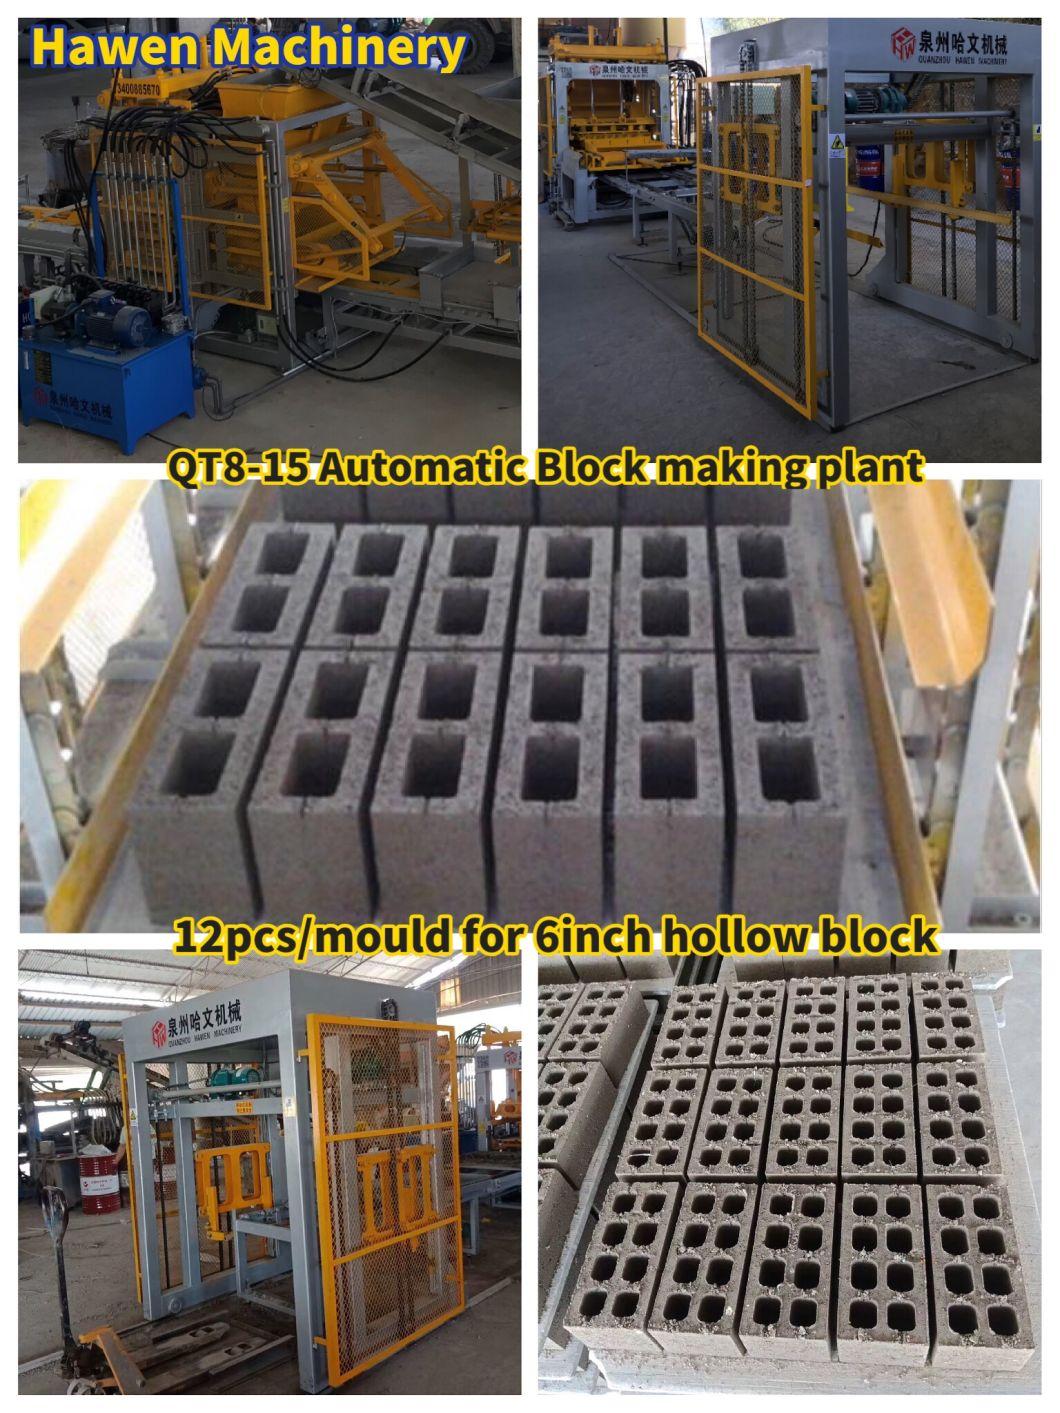 Concrete Block Brick Paver Production Line From China Leading Supplier Hawen Machinery